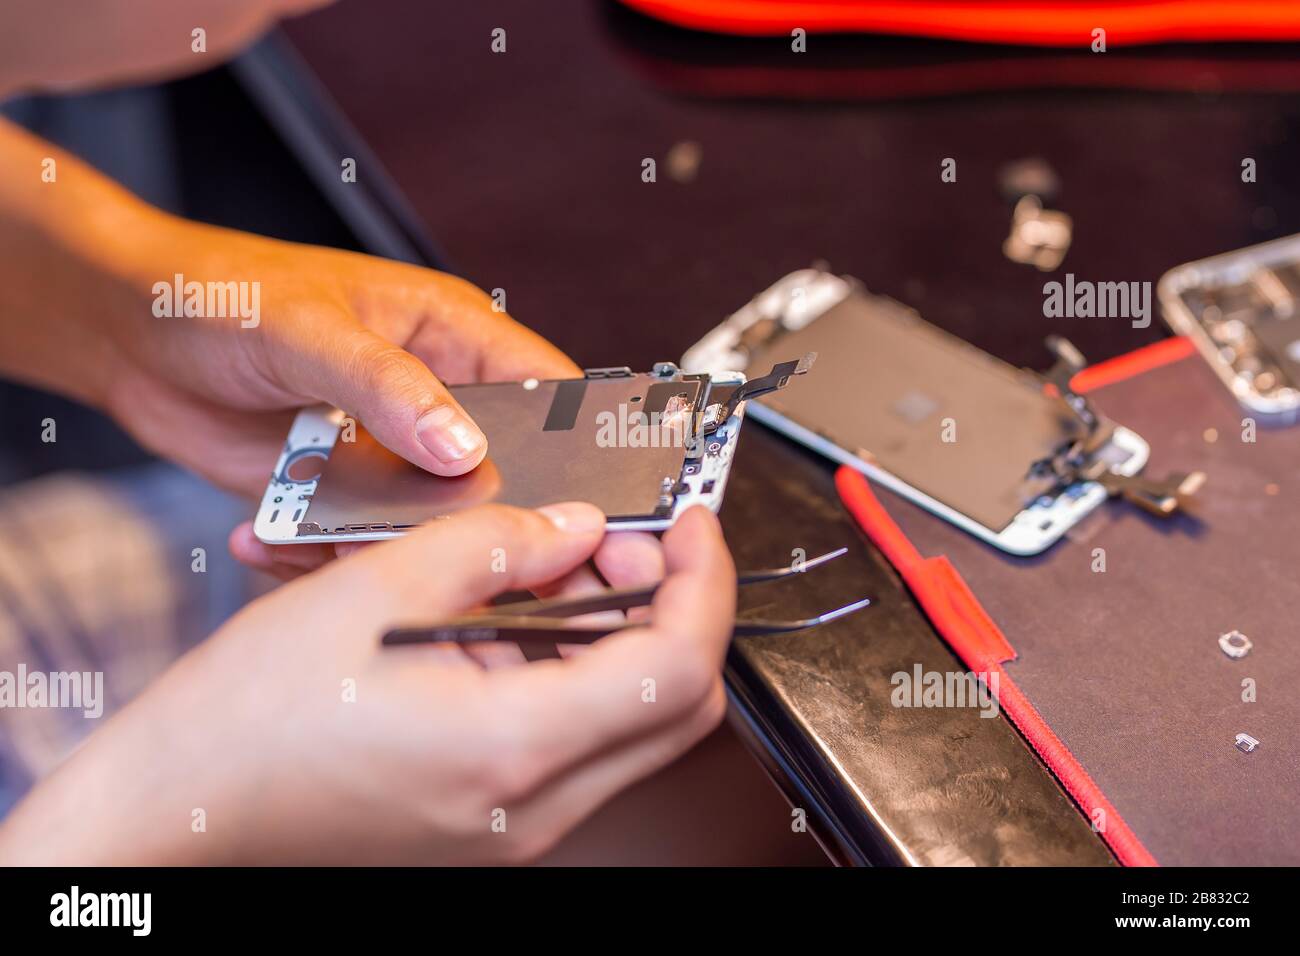 A man is repairing a mobile phone. In the frame, his hands and details of the device. repair shop for gadgets Stock Photo